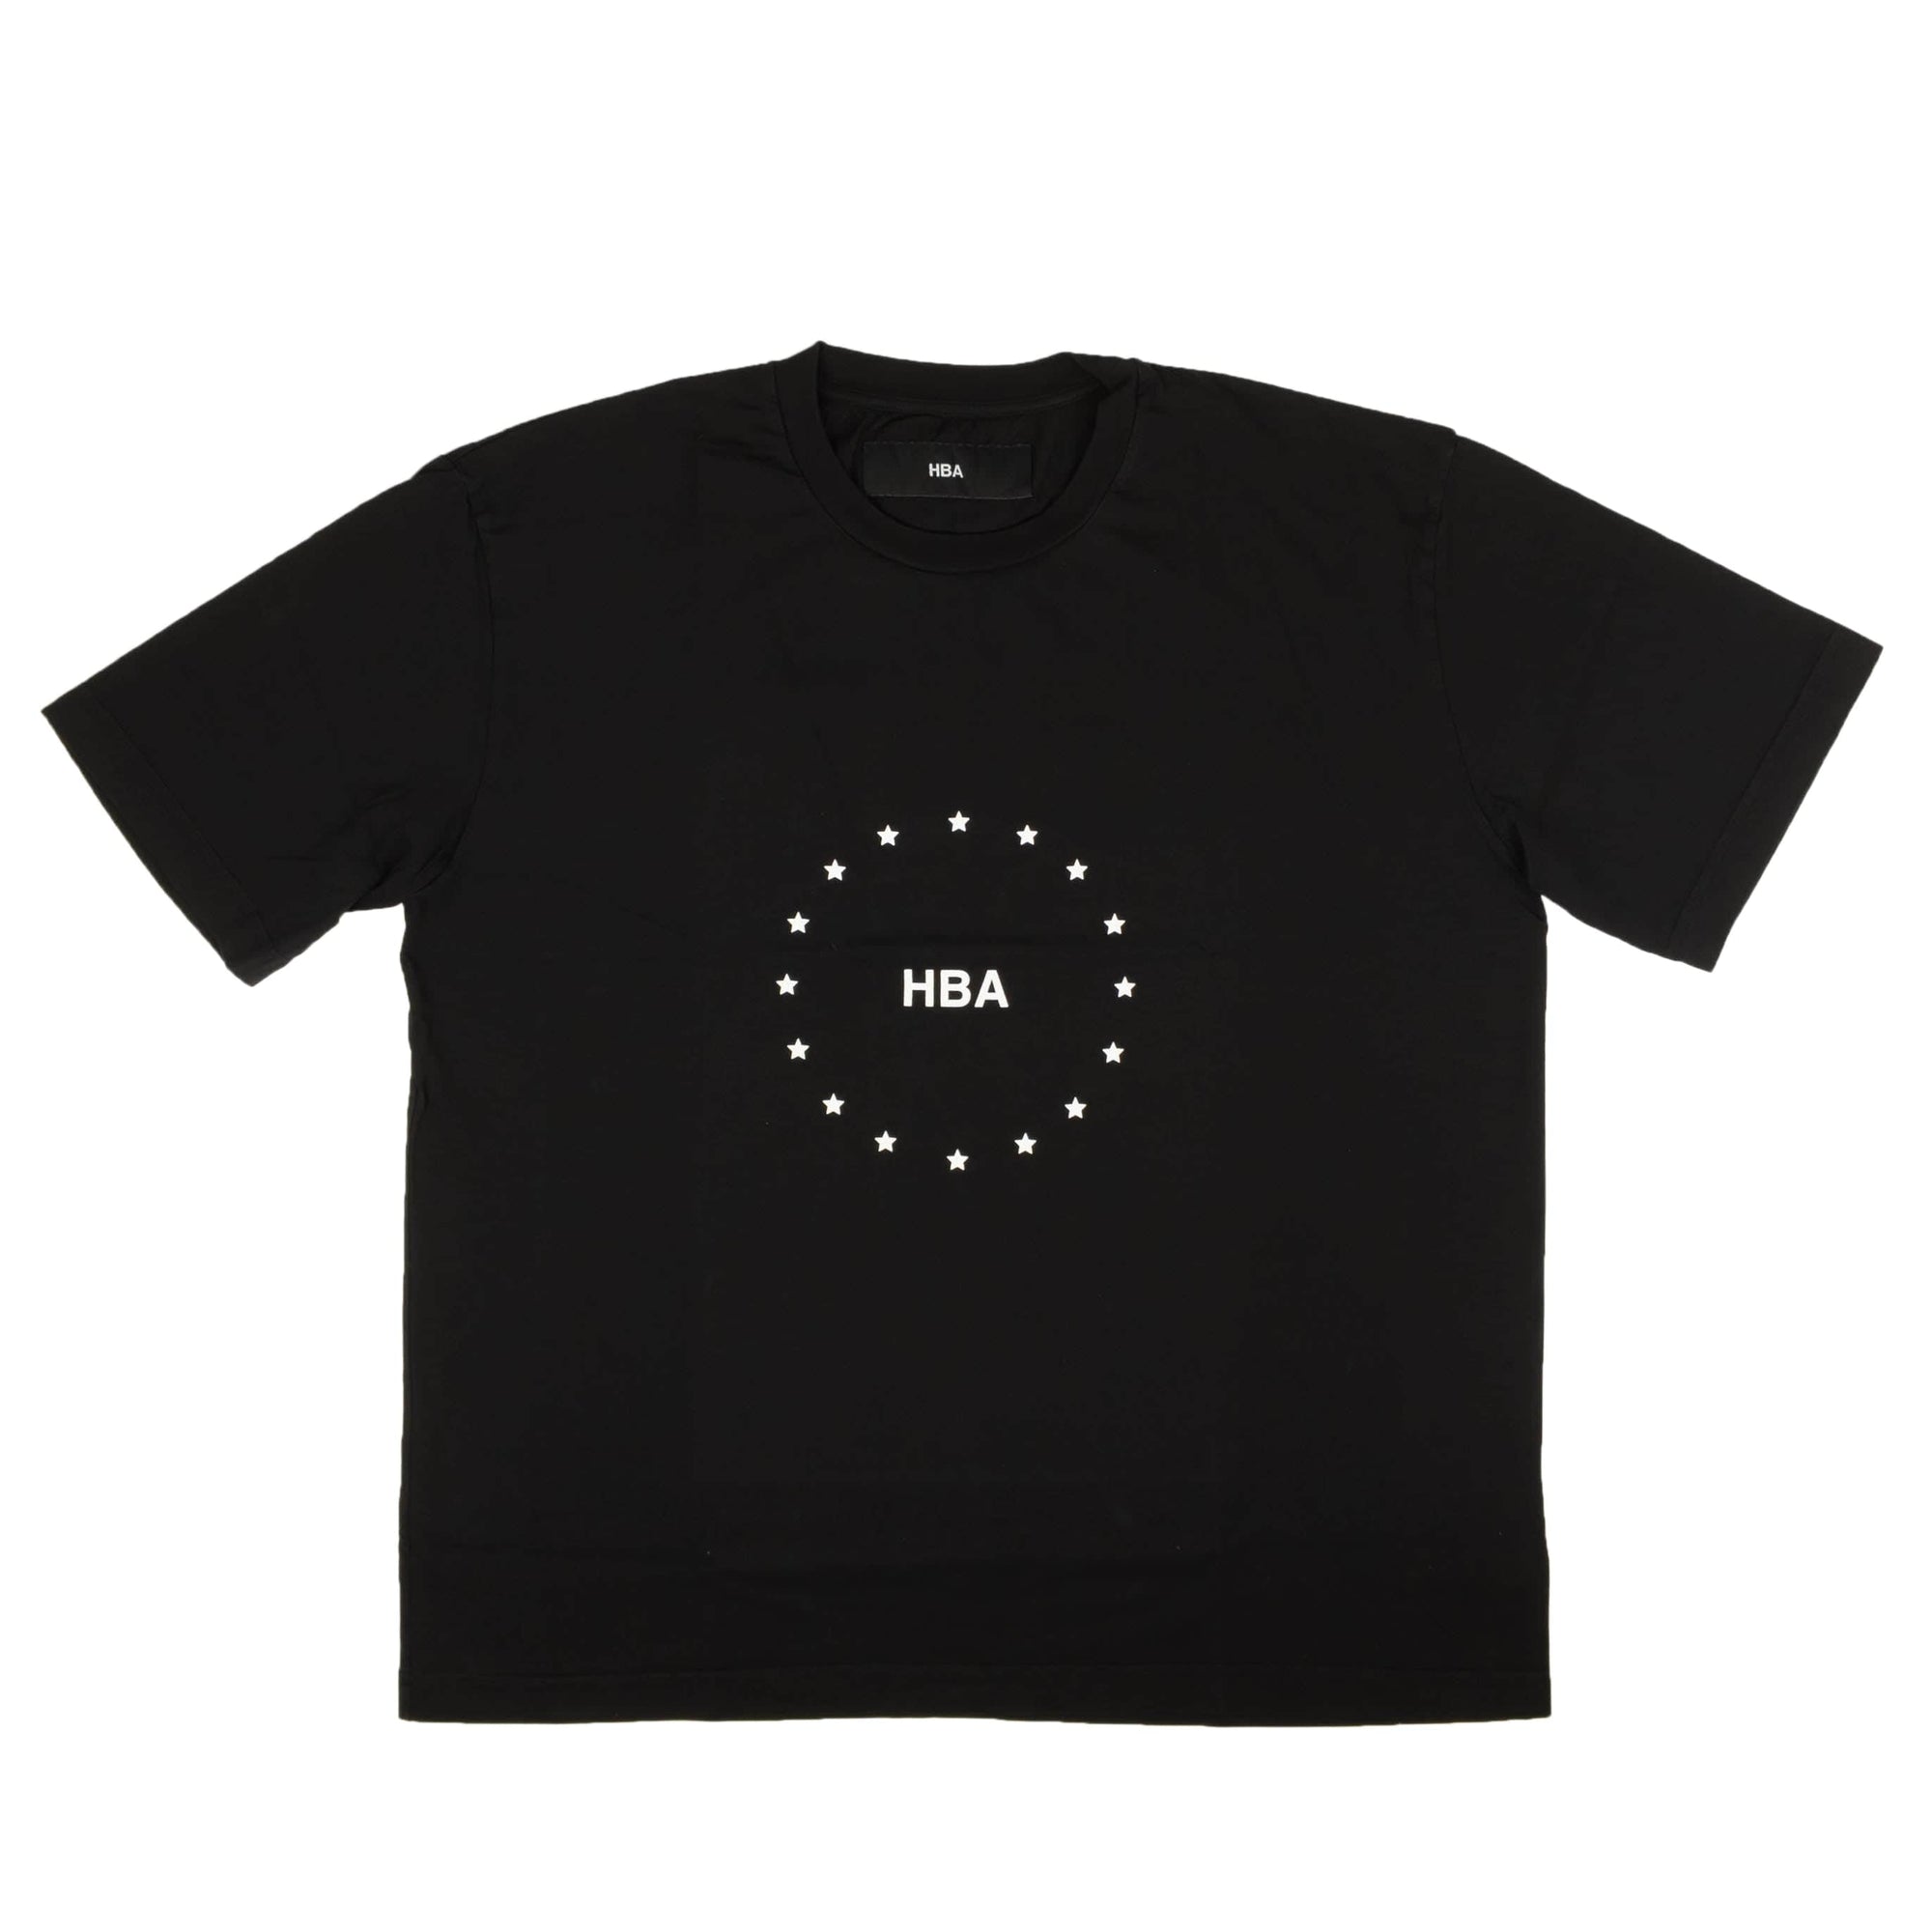 Hood By Air channelenable-all, chicmi, couponcollection, gender-mens, hood-by-air, main-clothing, mens-shoes, MixedApparel, size-l, size-m, size-s, size-xl, under-250 Black Star Short Sleeve T-Shirt